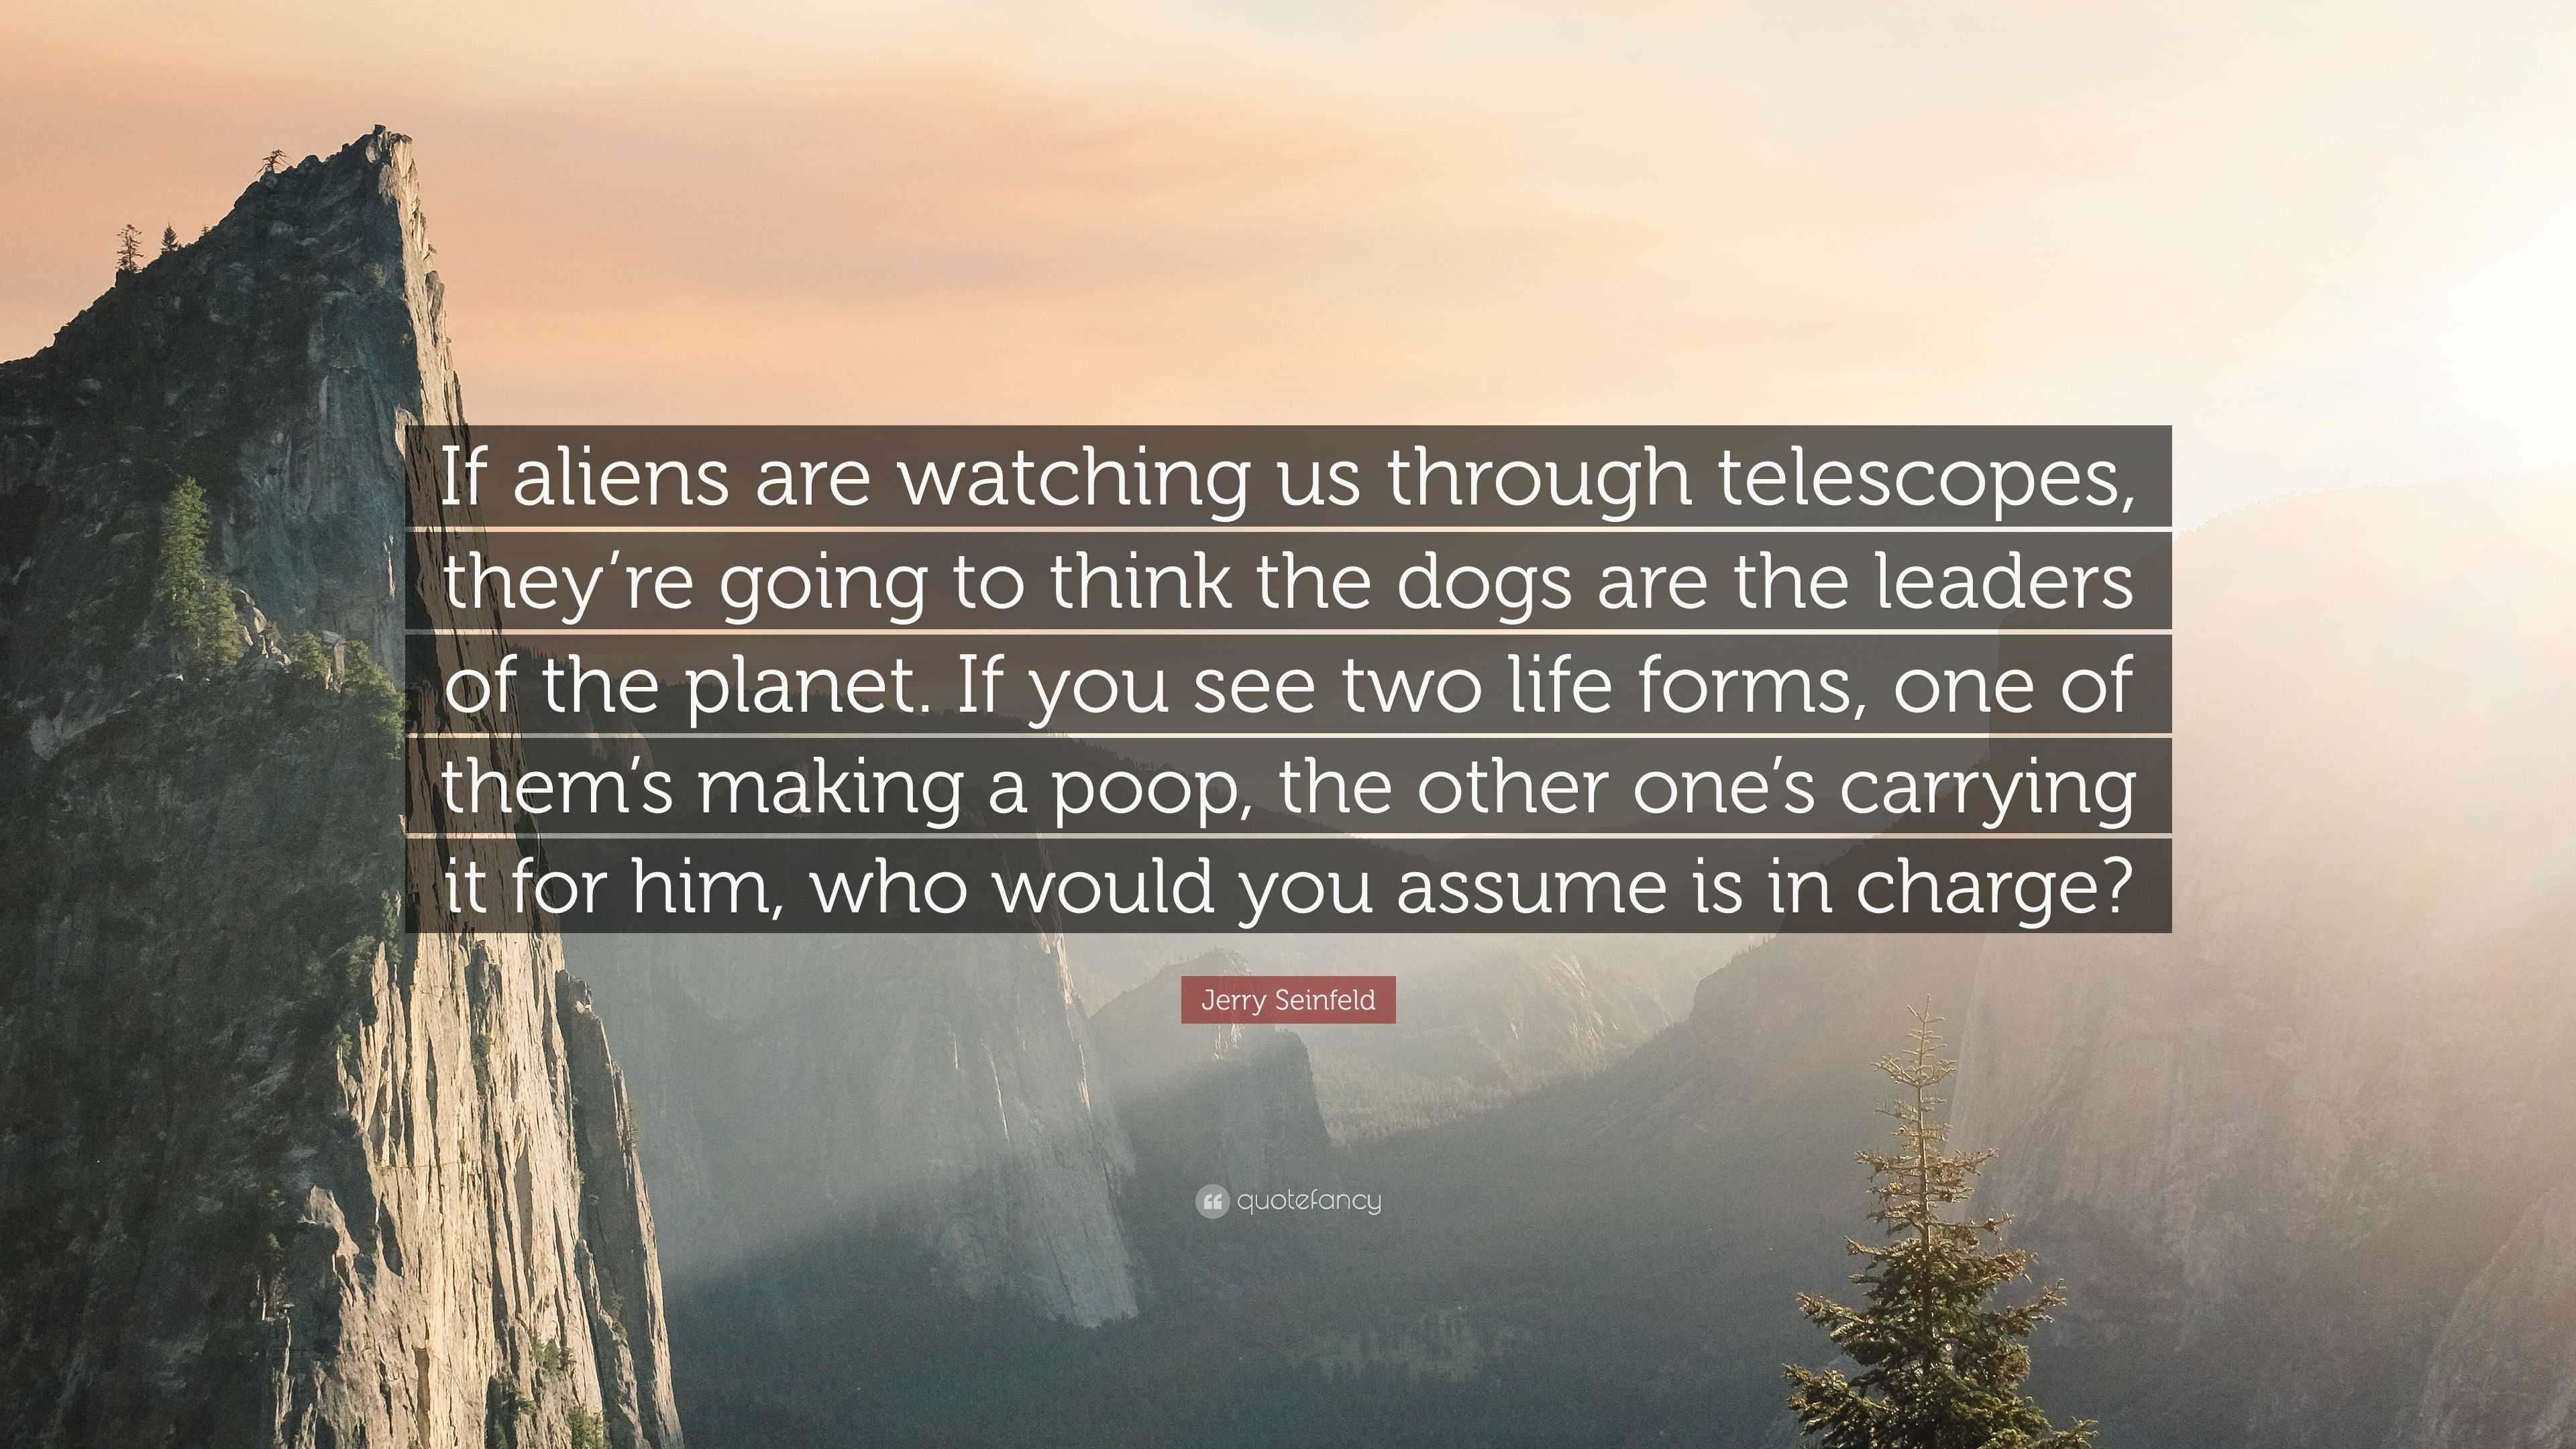 Jerry Seinfeld Quote If Aliens Are Watching Us Through Telescopes They Re Going To Think The Dogs Are The Leaders Of The Planet If You See 9 Wallpapers Quotefancy